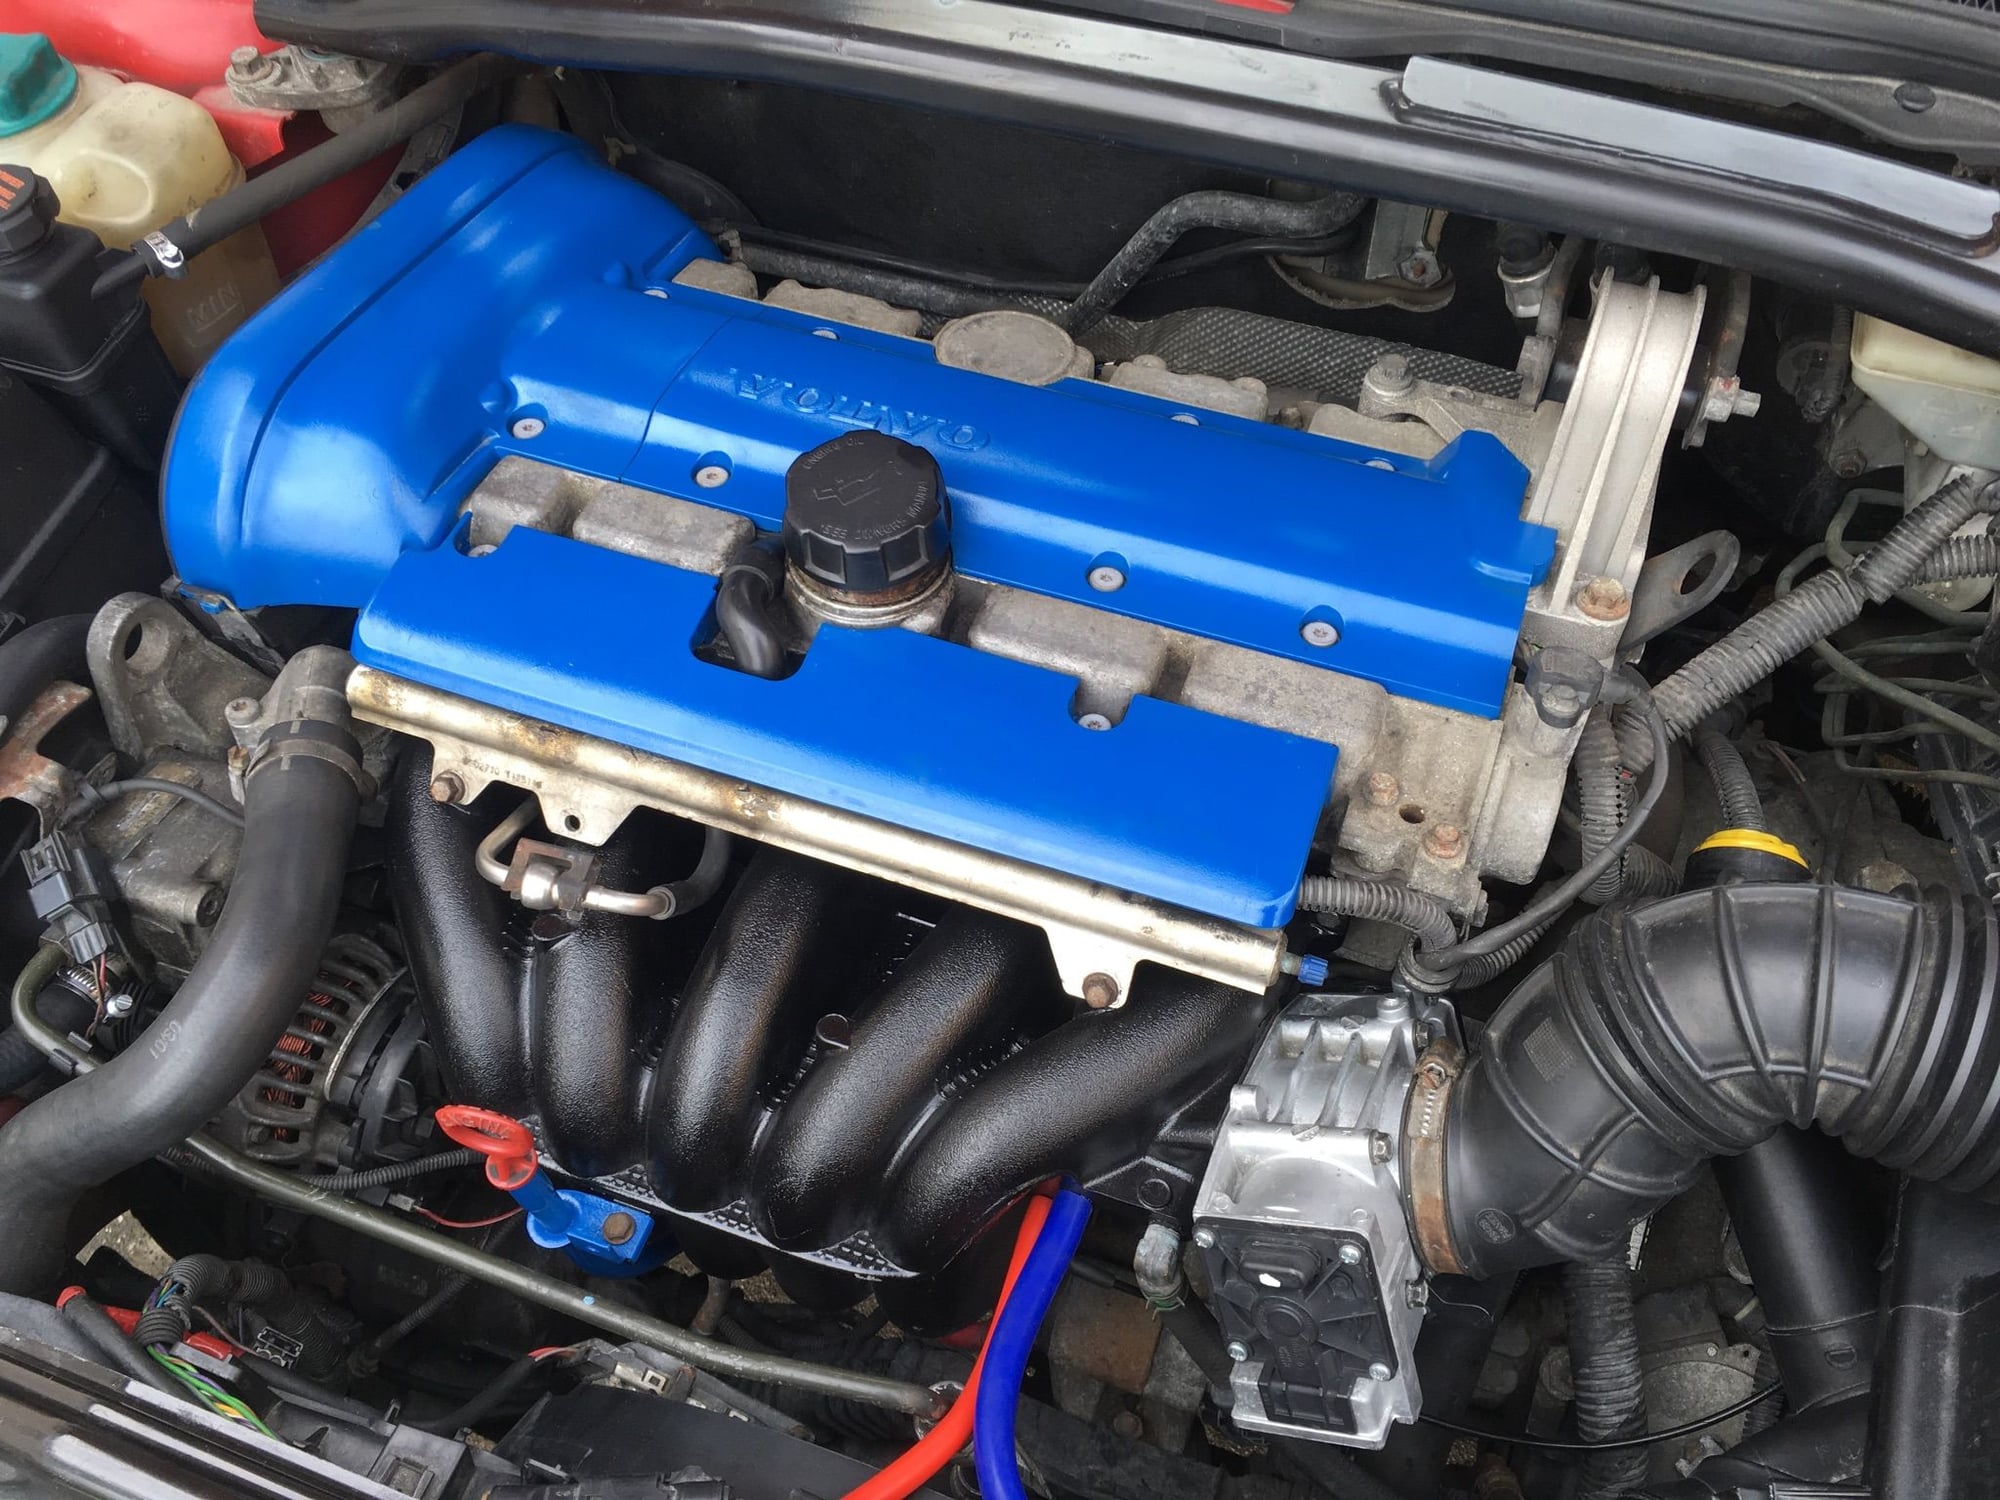 Turbo Intake Manifold Installed Inside a Normally-Aspirated S60 - Volvo